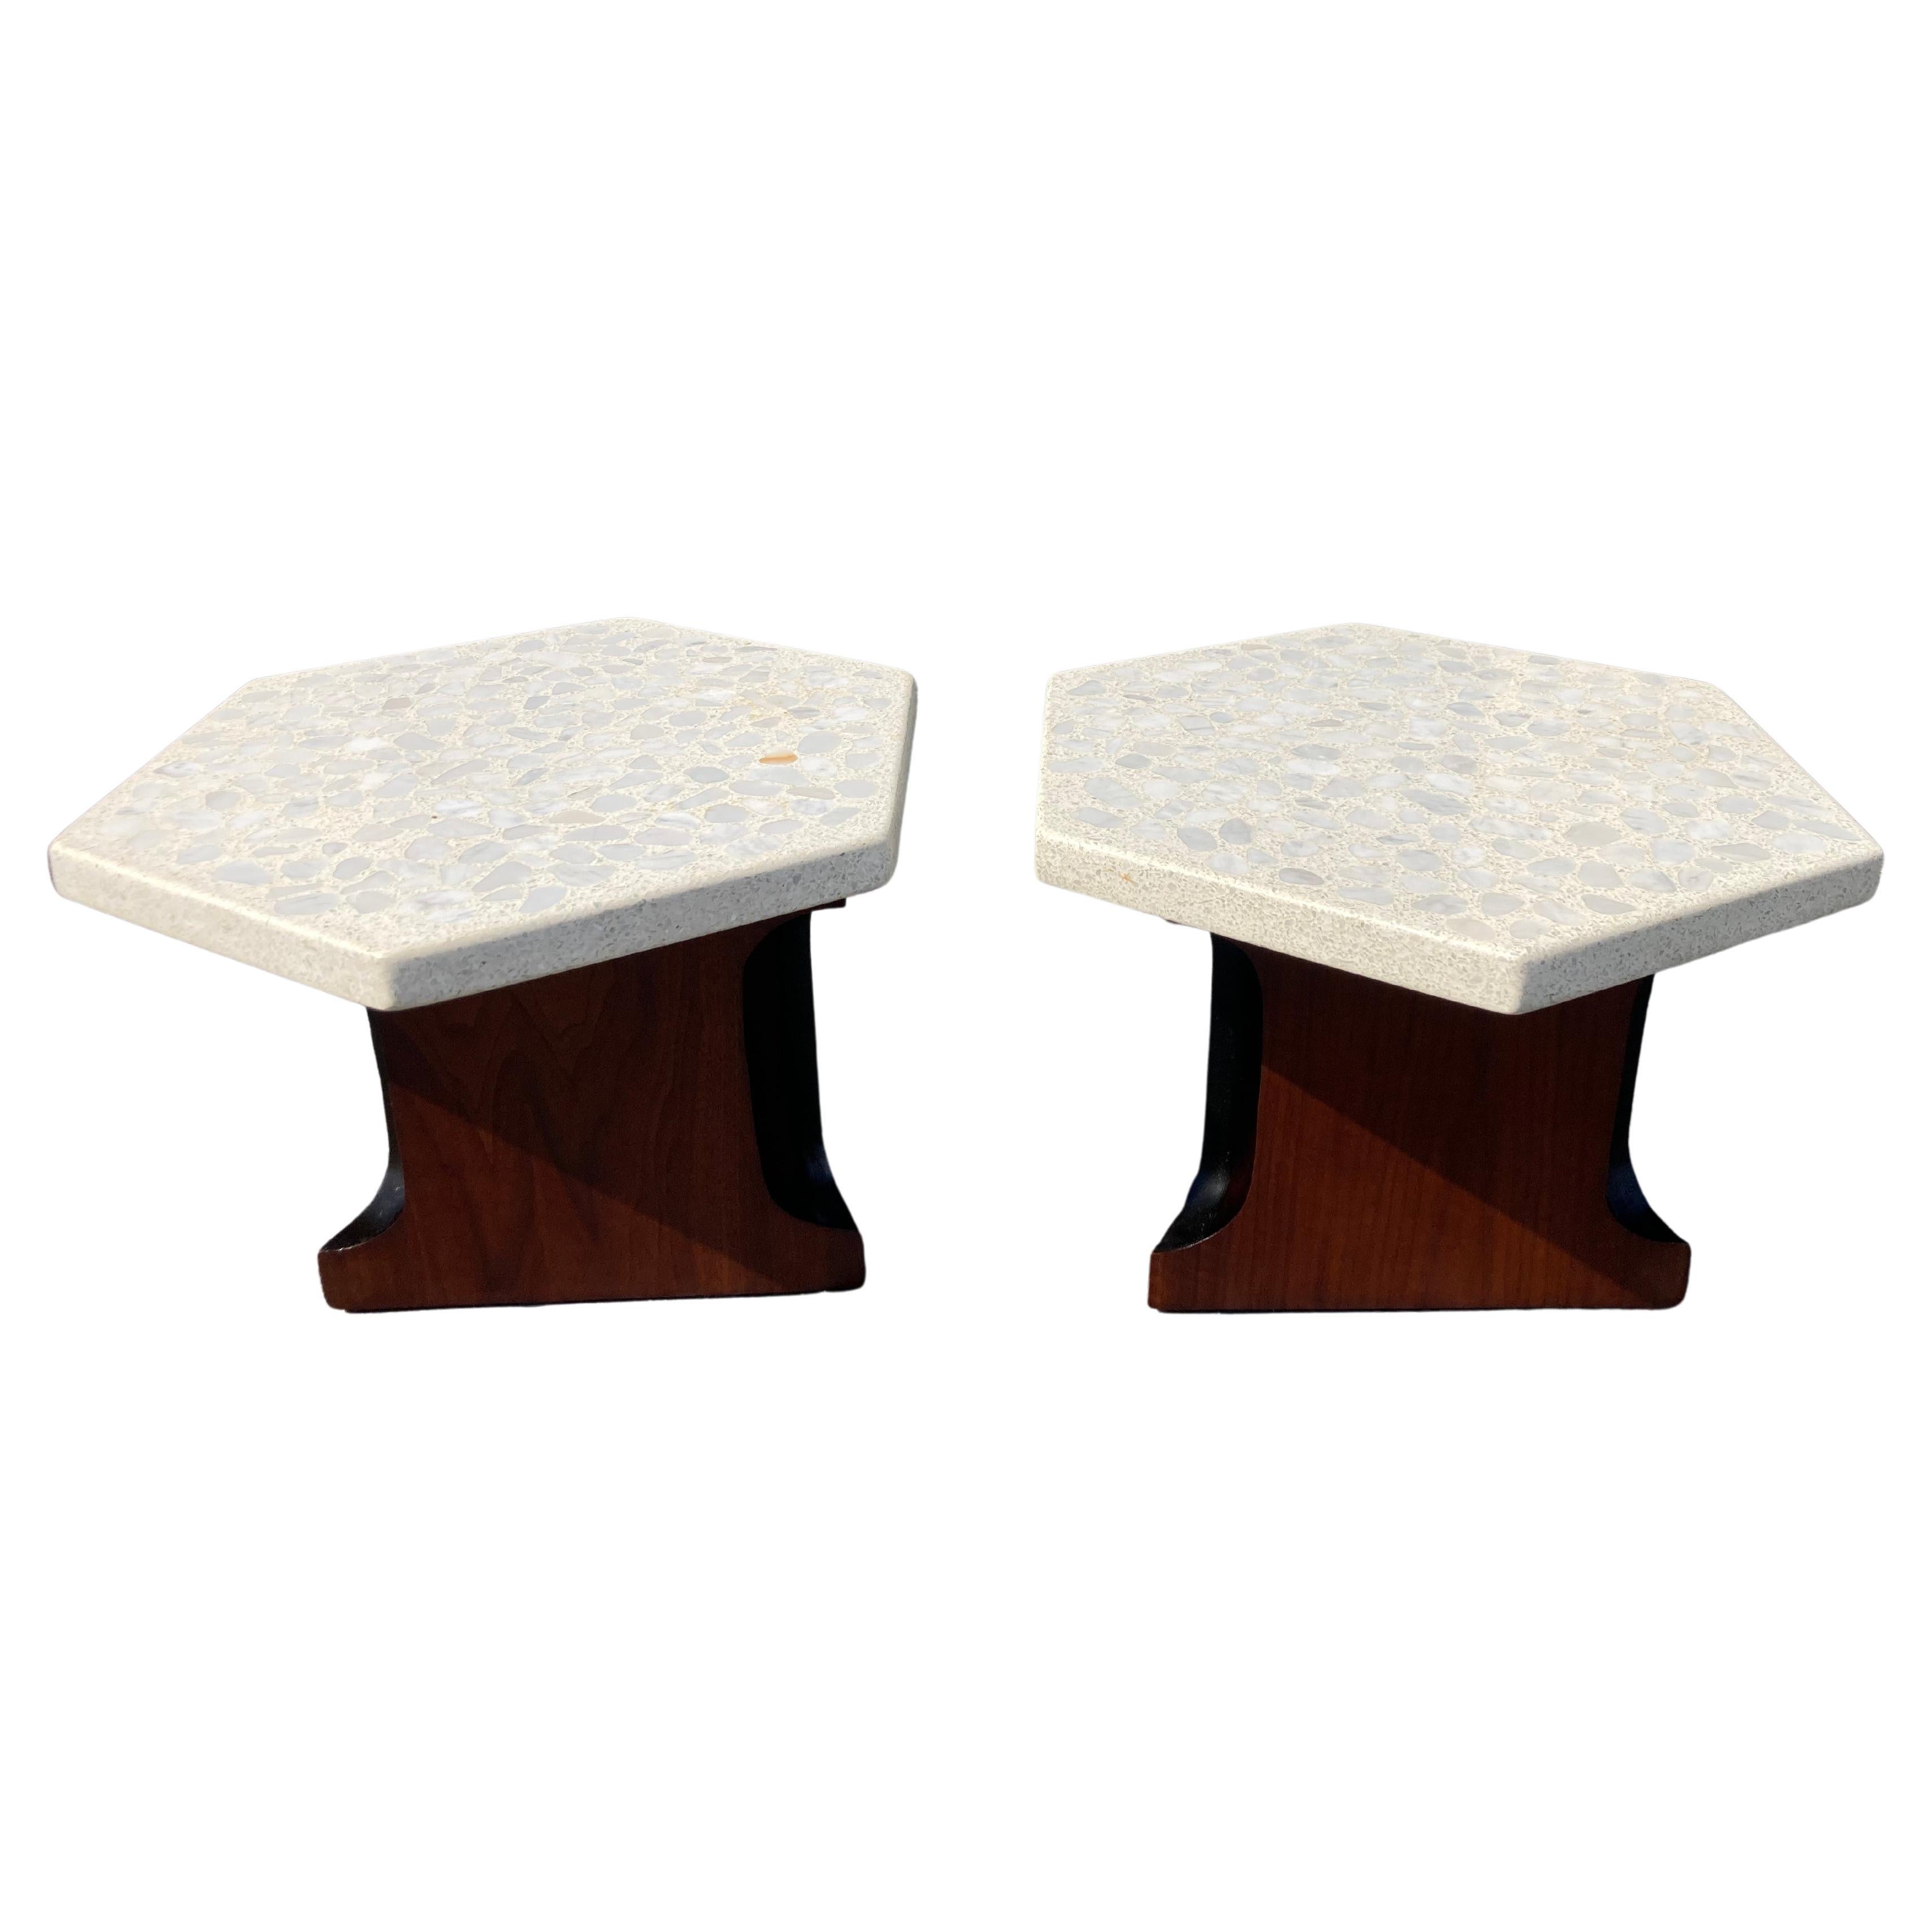 Tables d'appoint hexagonales Terazzo style Harvey Probber avec plateau